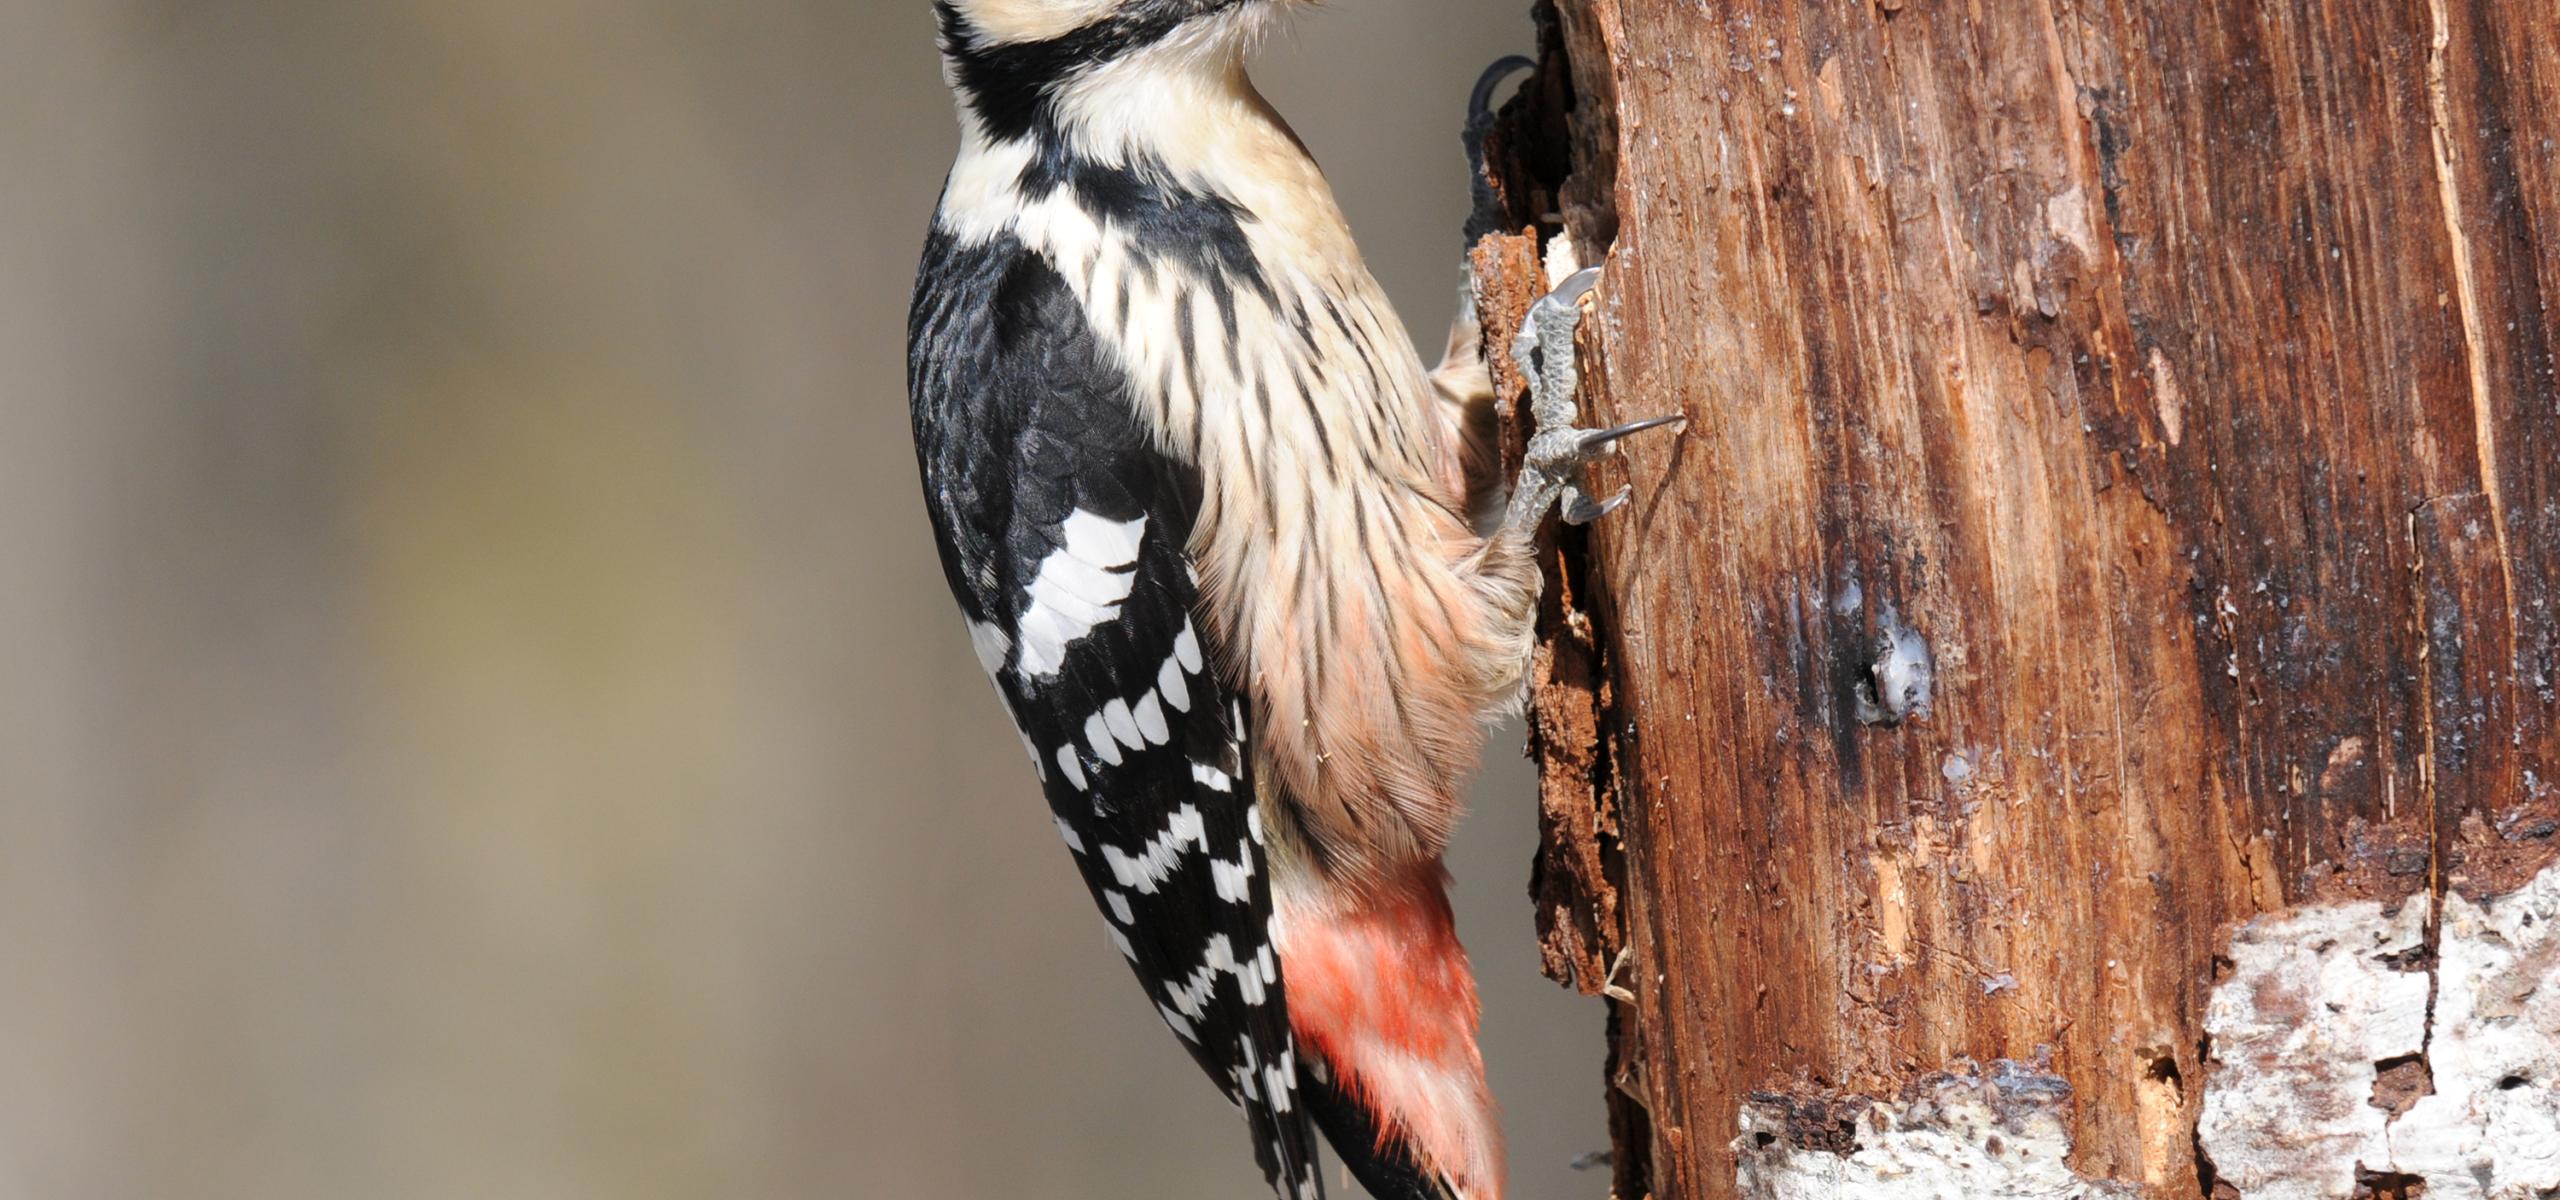 White-backed woodpecker sits on a rotting tree trunk and pecks at insects and larvae with its beak